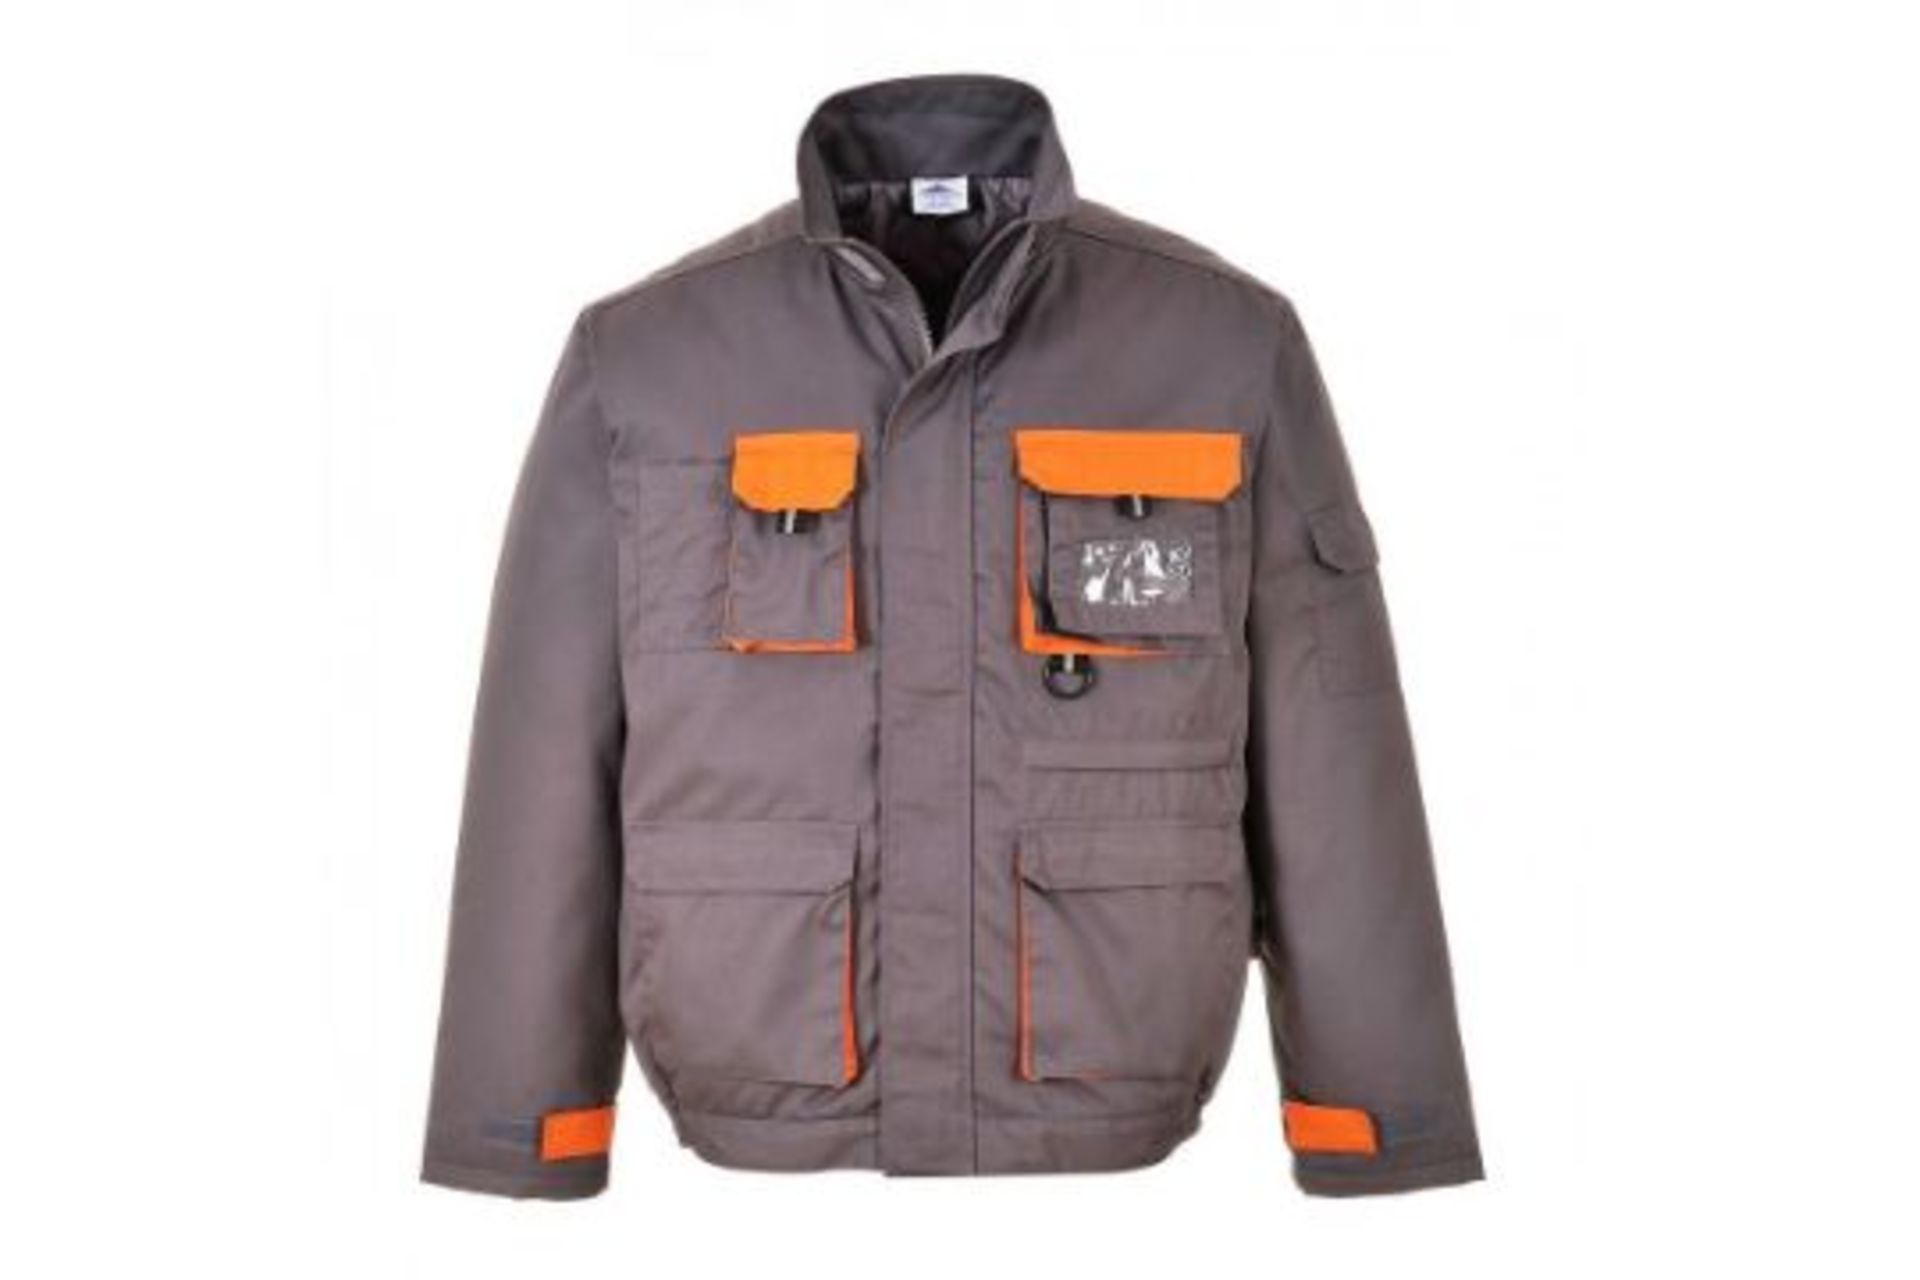 Portwest Constrast Jacket Gery/Orange Size Small RRP £49.00